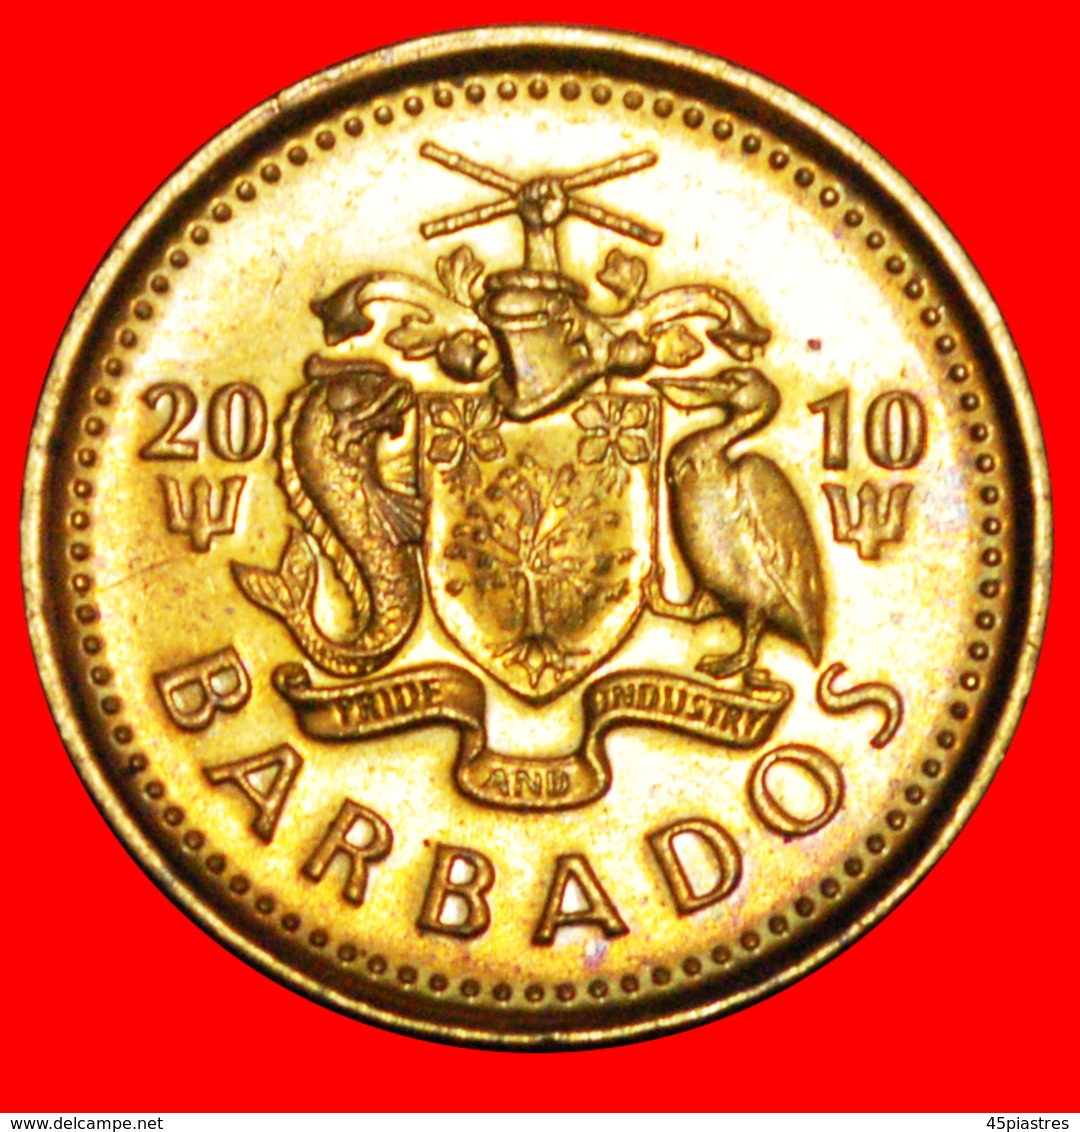 + GREAT BRITAIN (2007-2018): BARBADOS ★ 5 CENTS 2010 MINT LUSTER! LOW START ★ NO RESERVE! - Barbados